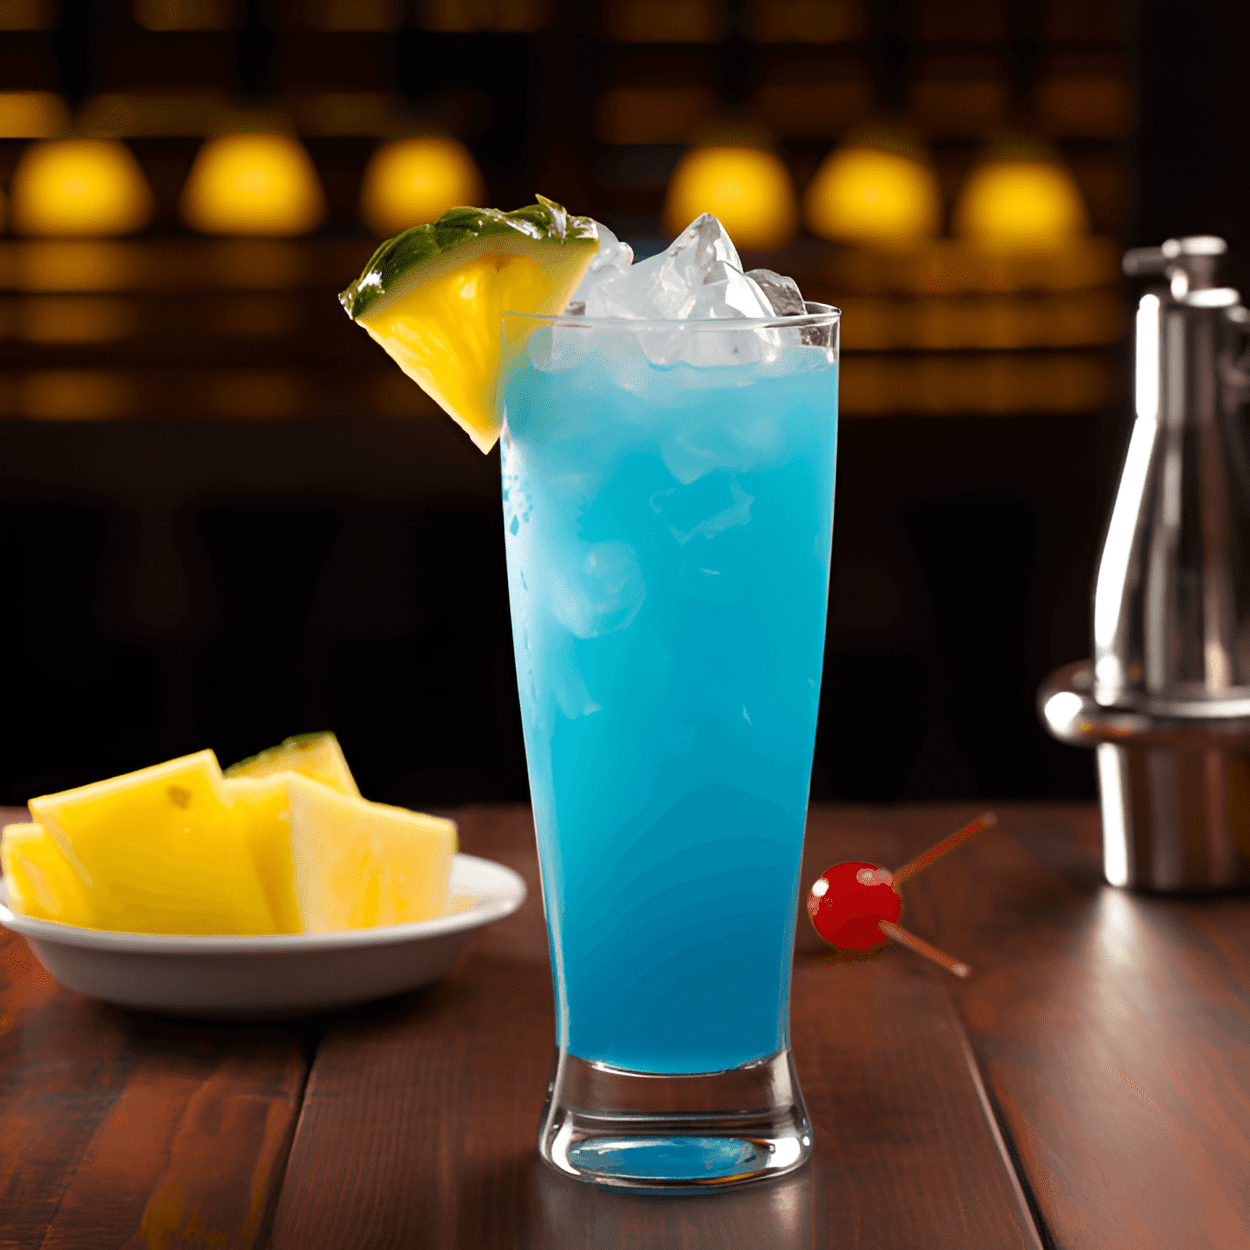 Blue Whale Cocktail Recipe - The Blue Whale is a sweet, fruity cocktail with a hint of tartness. The combination of blue curacao, vodka, and lemonade creates a refreshing, citrusy flavor that's balanced out by the sweetness of the pineapple juice. It's a strong drink, but the alcohol is well-masked by the other flavors.